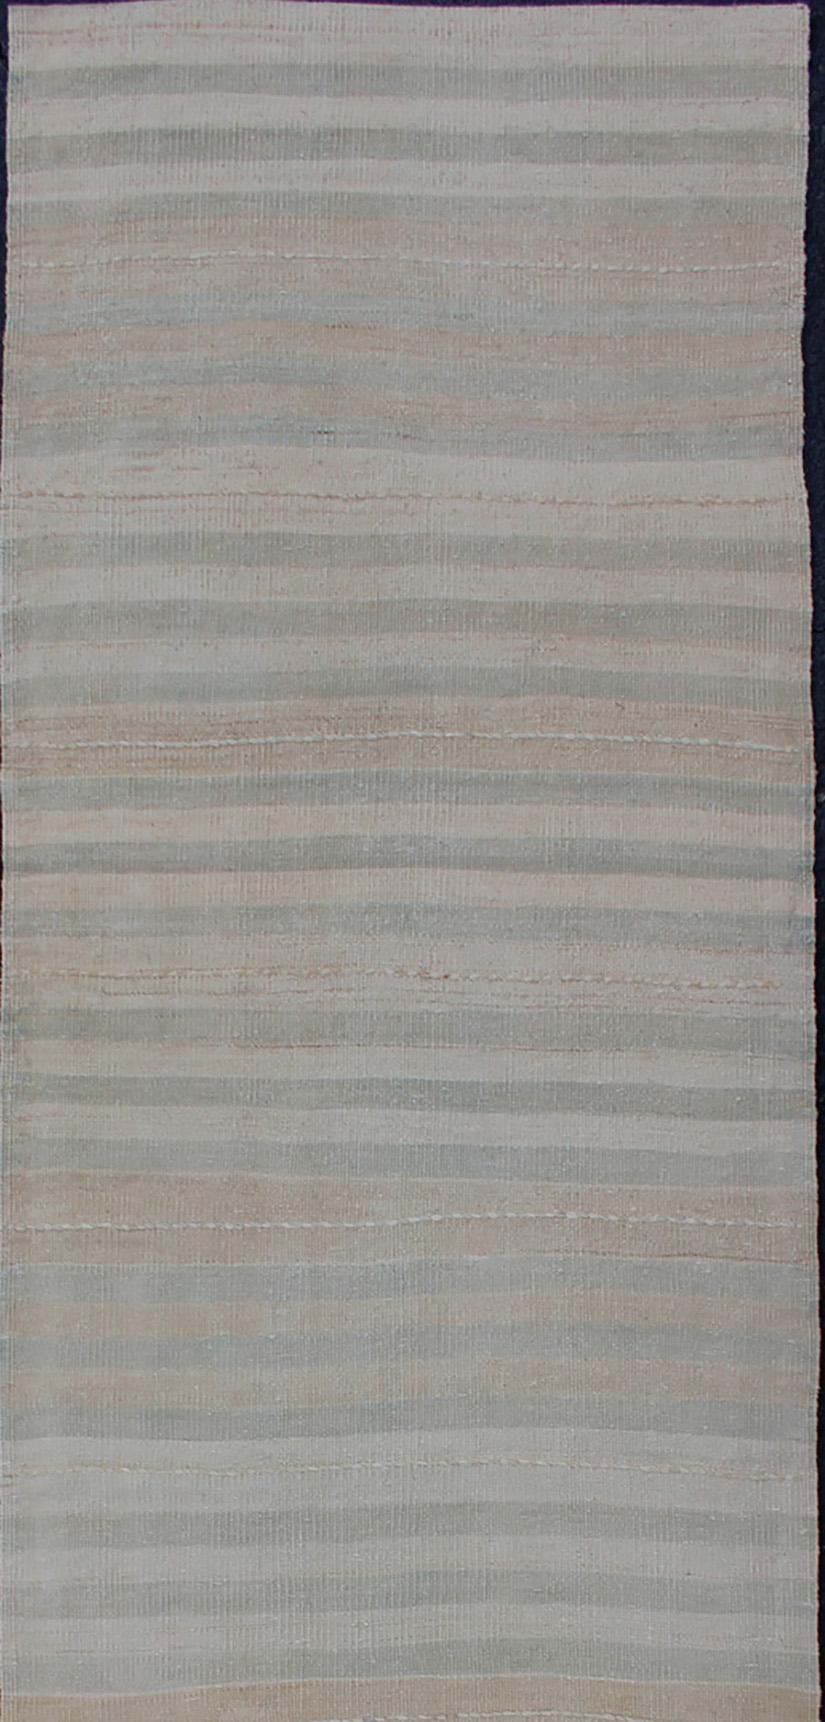 Hand-Woven Vintage Turkish Kilim Runner with a Stripe and Modern Design in Neutral Tones For Sale